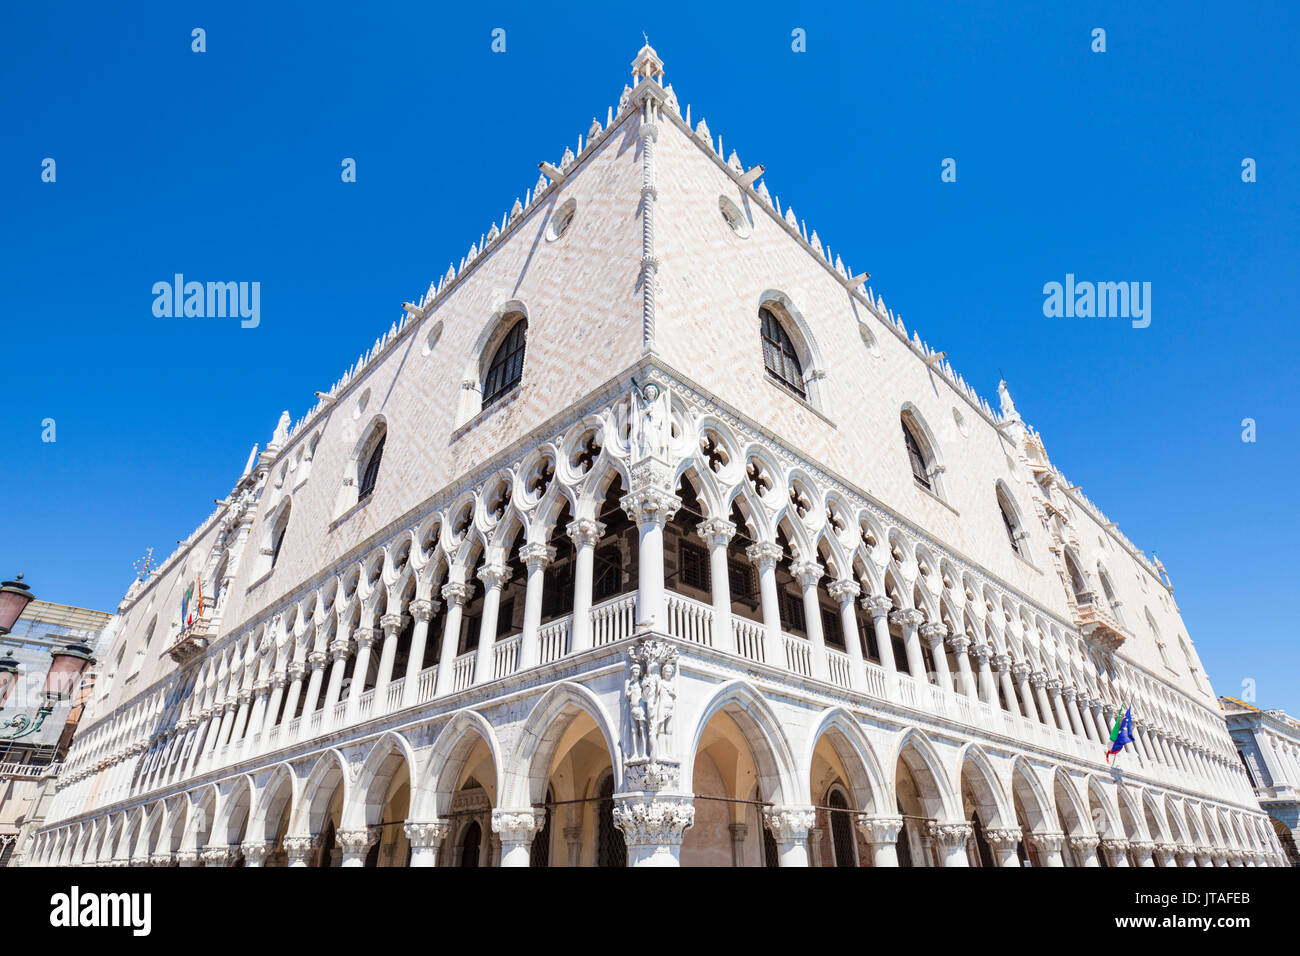 Palazzo Ducale, (Doges Palace), Piazzetta, Piazza San Marco (St. Marks Square), Venice, UNESCO, Veneto, Italy, Europe Stock Photo